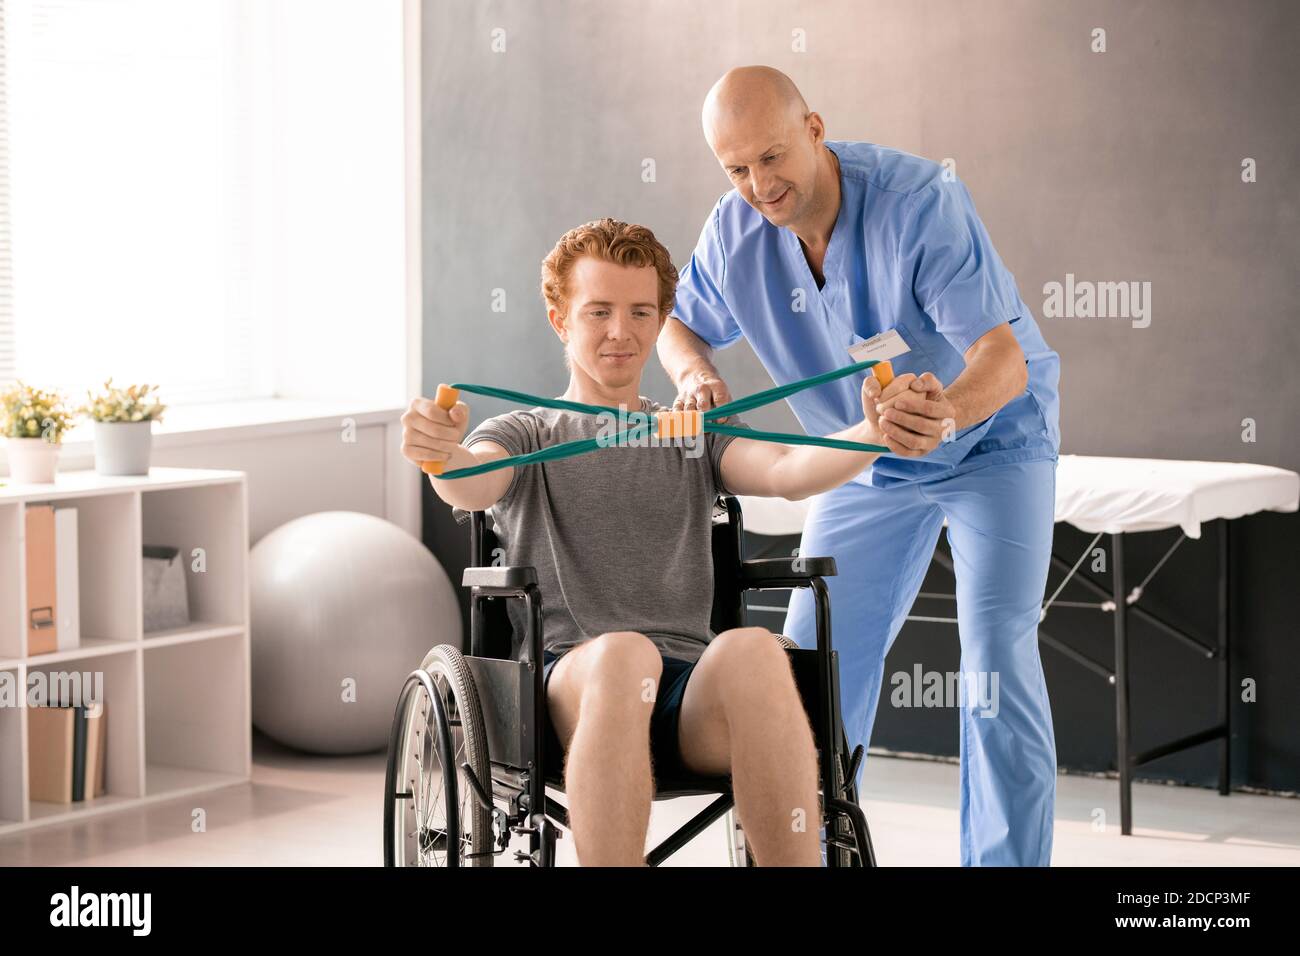 Mature clinician in blue uniform supporting hand of young patient in wheelchair Stock Photo